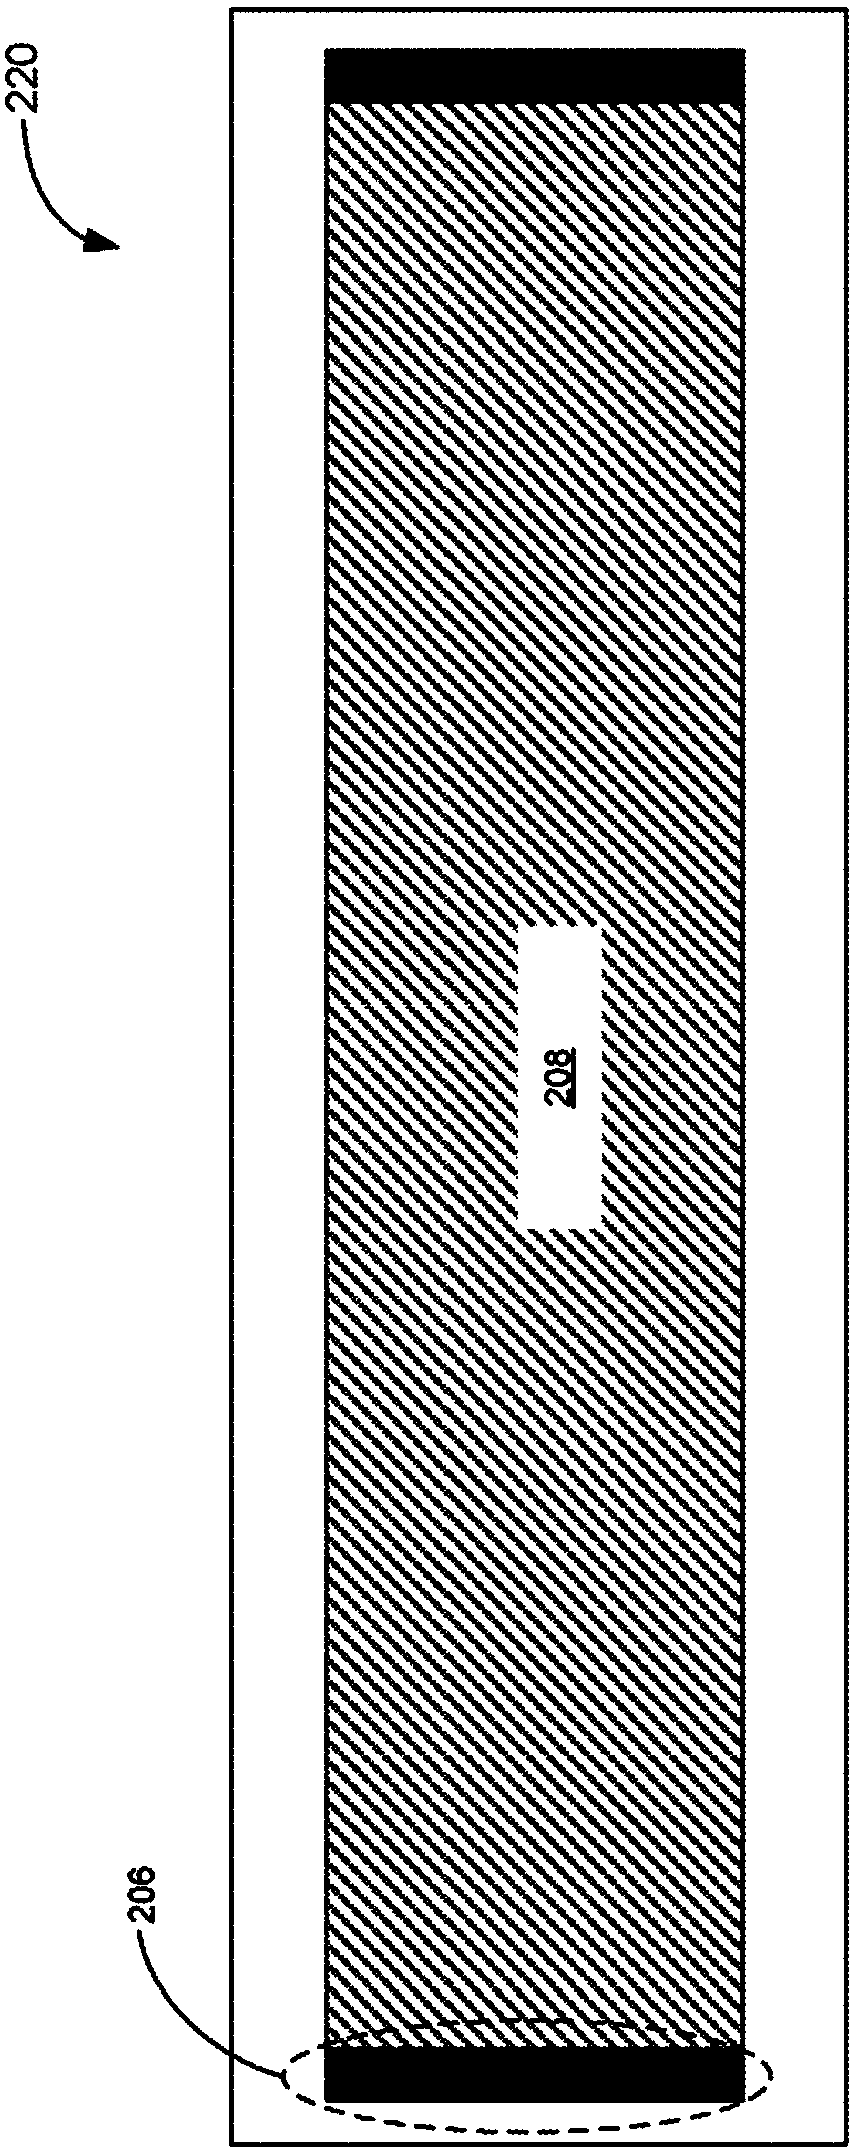 Manufacturing apparatus for flexible electronics